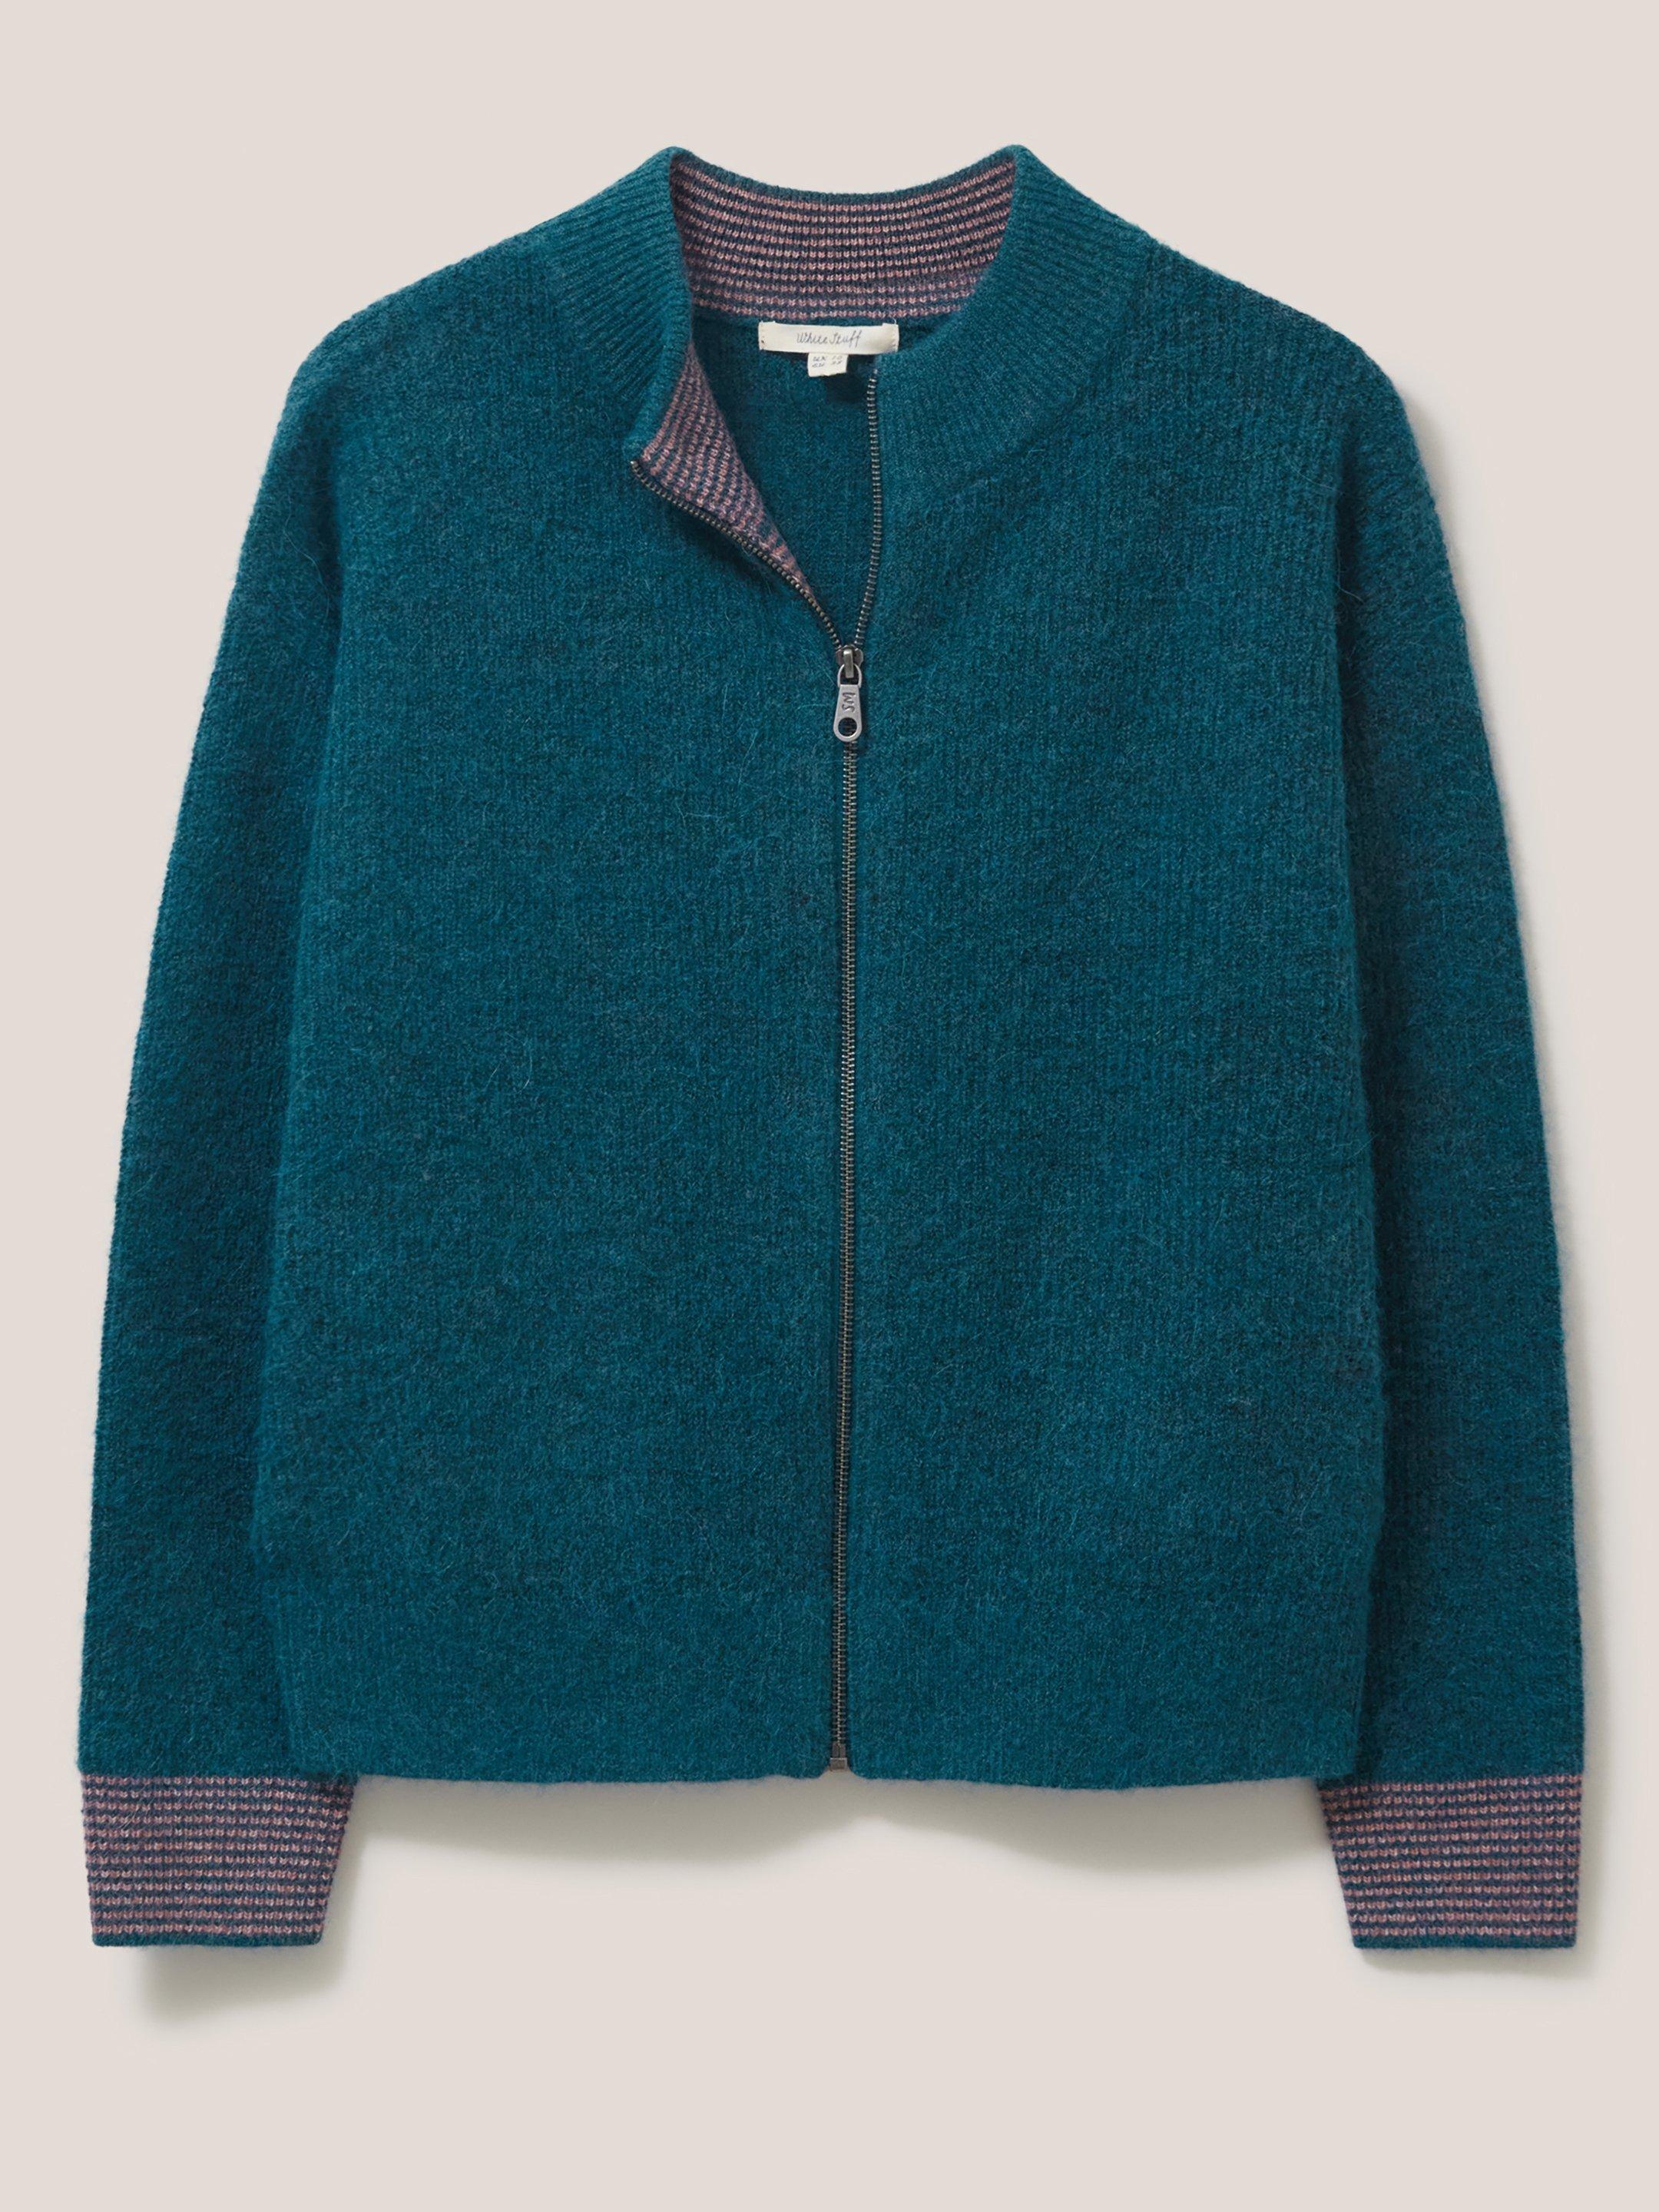 Weekend Knit Bomber in DK TEAL - FLAT FRONT